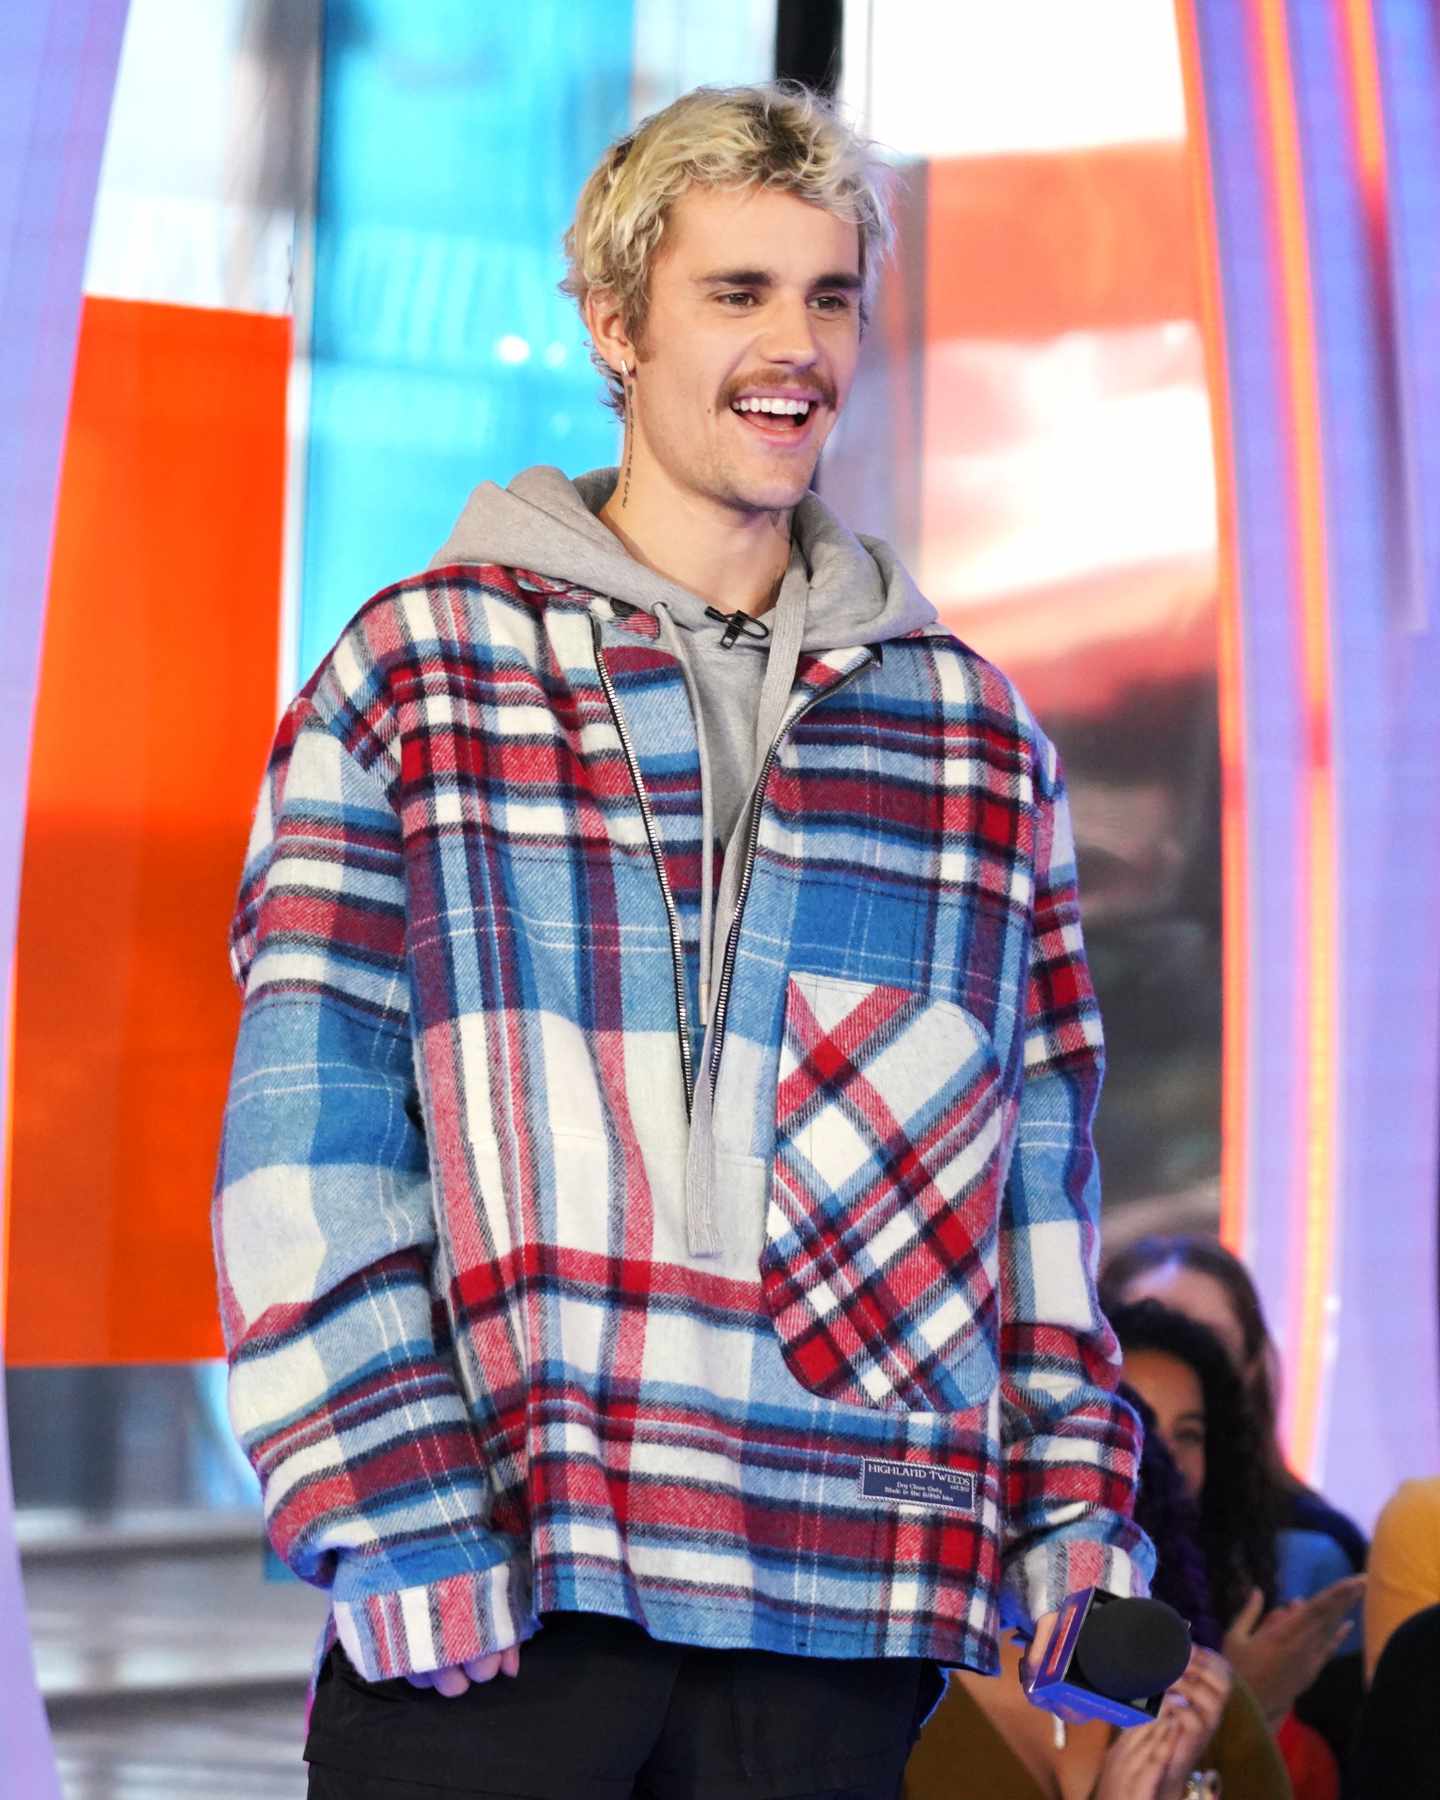 Justin Bieber Storms MTV’s “Fresh Out Live” and Makes a Superfan’s Dreams Come True